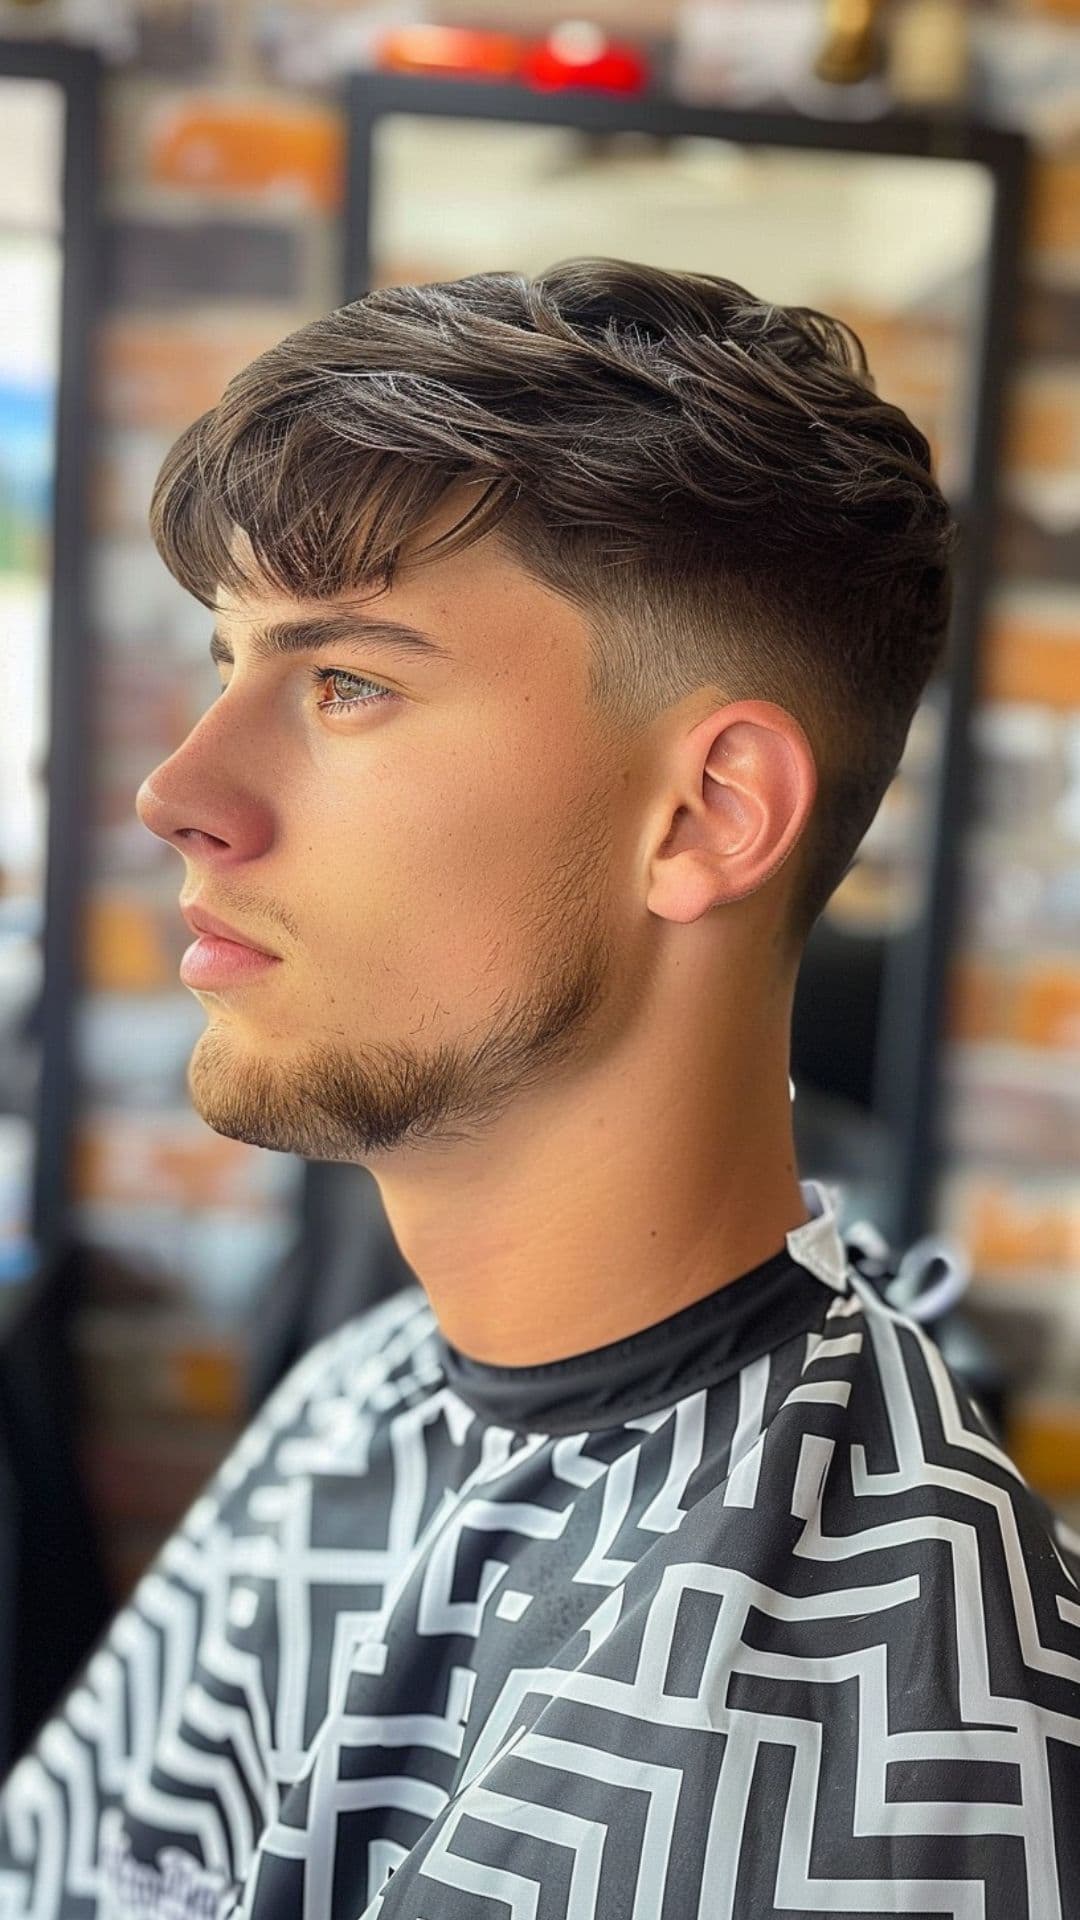 A man modelling a fringe hairstyle